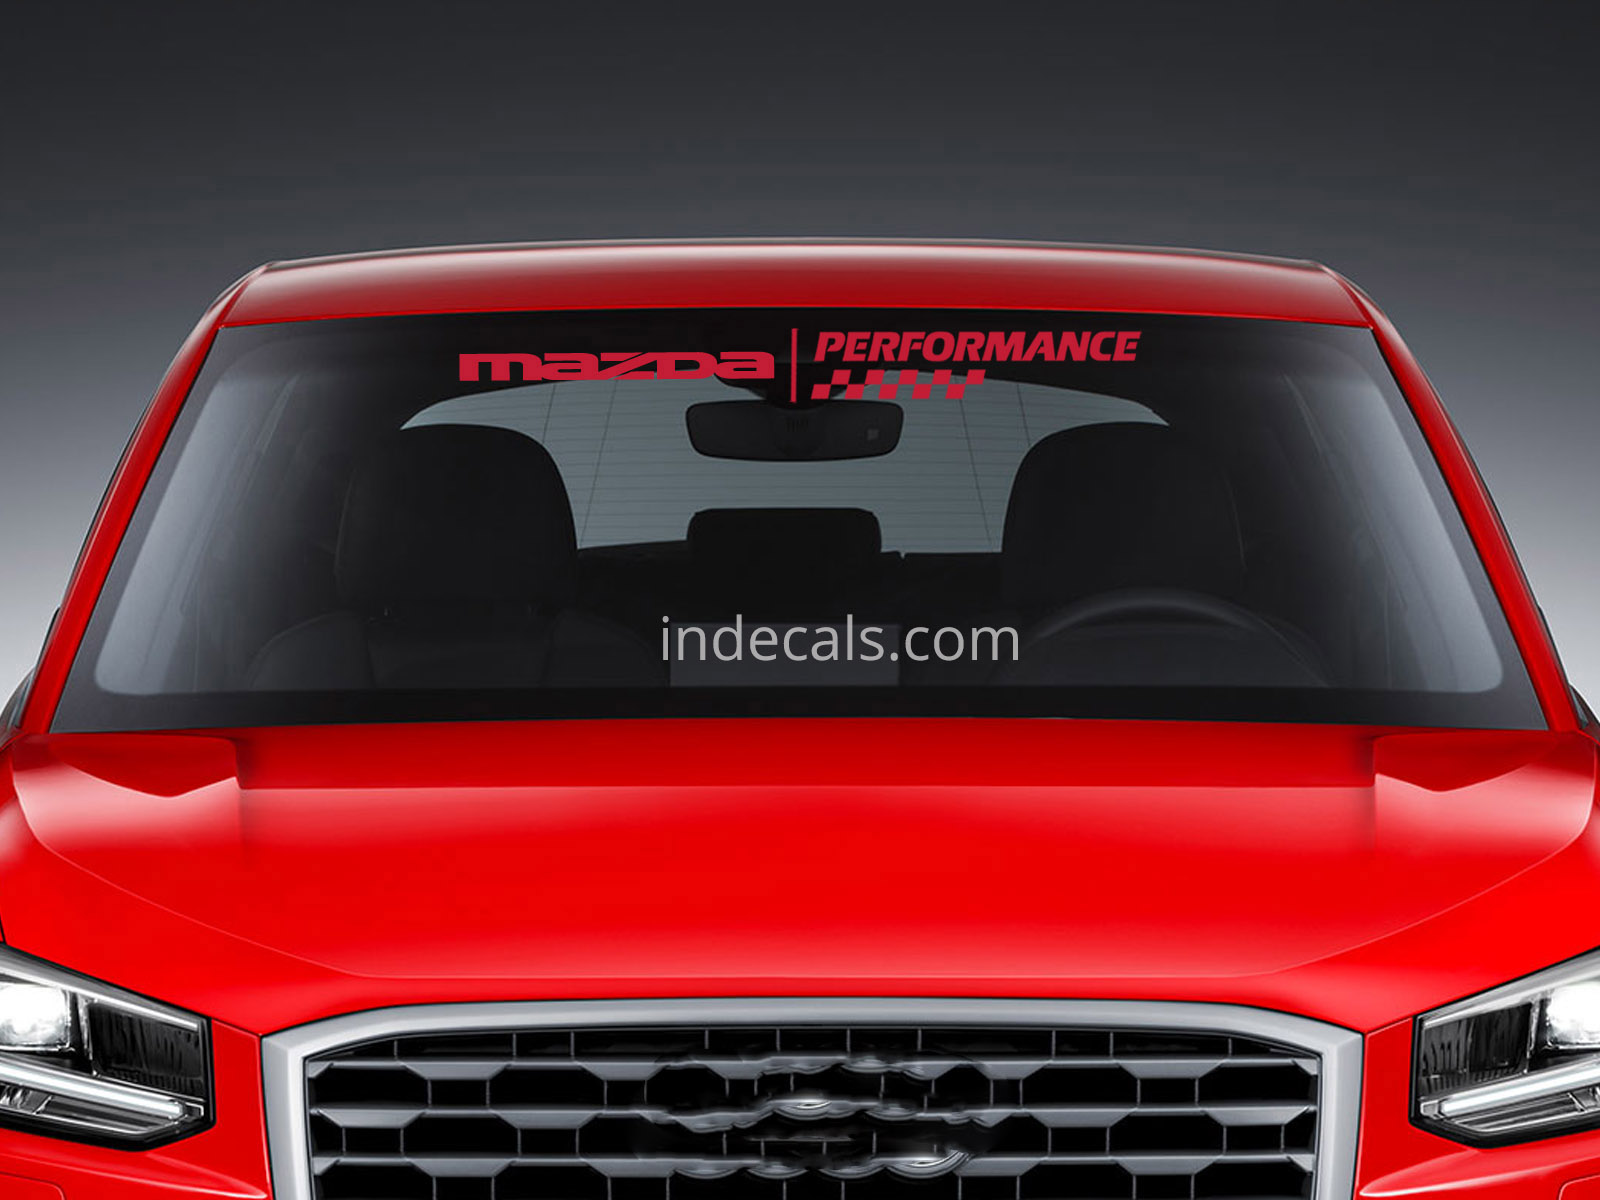 1 x Mazda Performance Sticker for Windshield or Back Window - Red